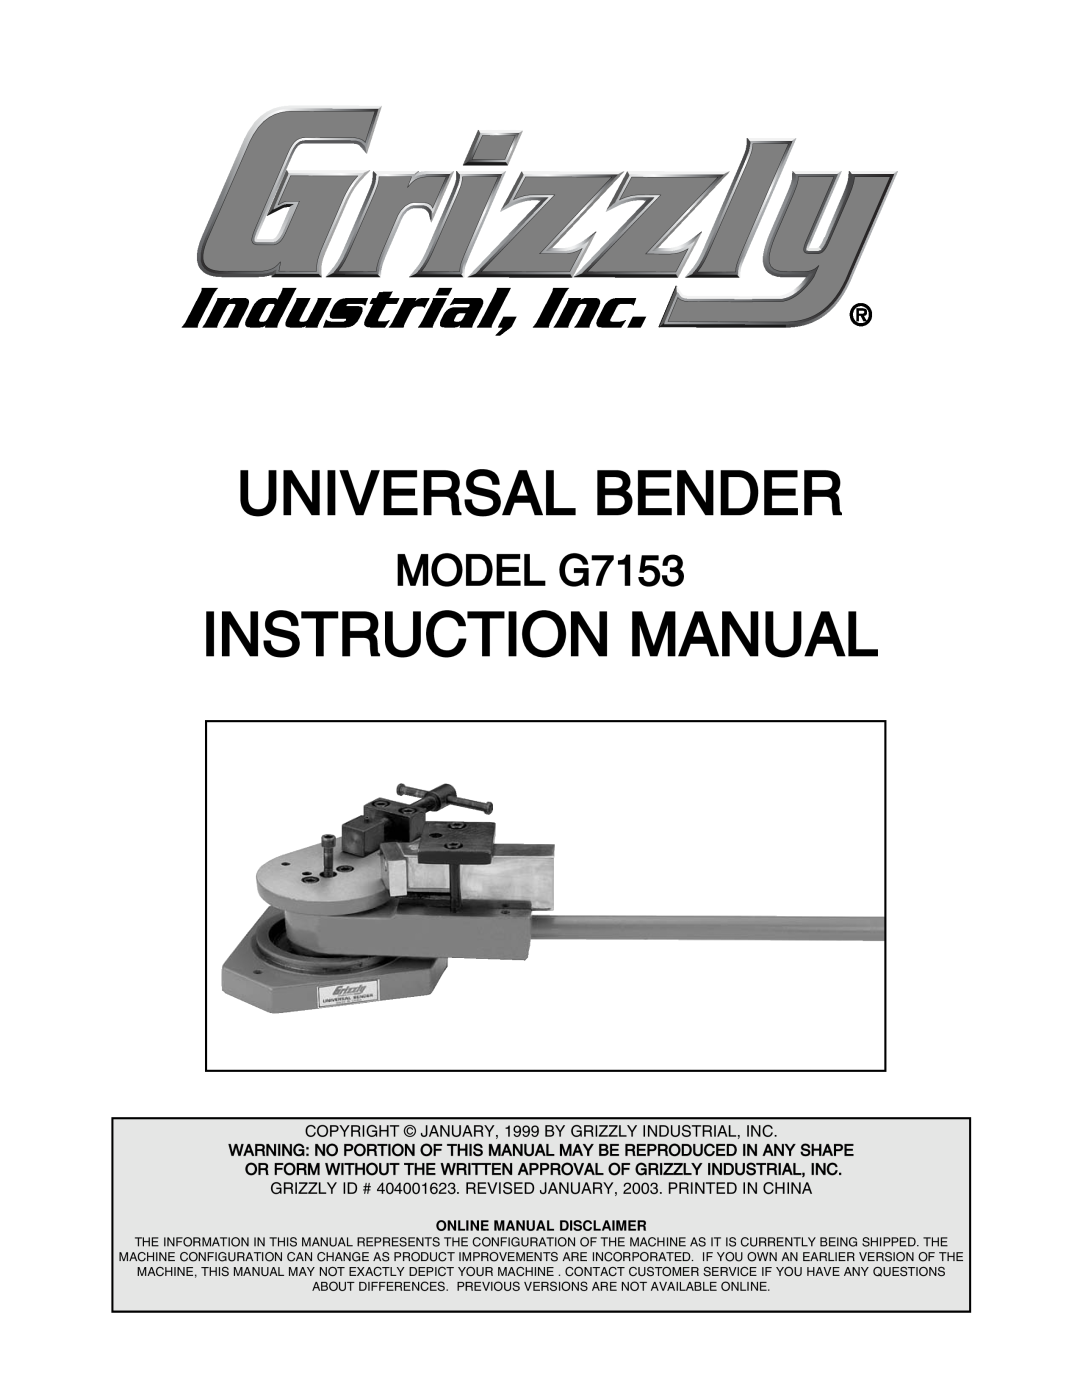 Grizzly manual MODEL G7153, Universal Bender 